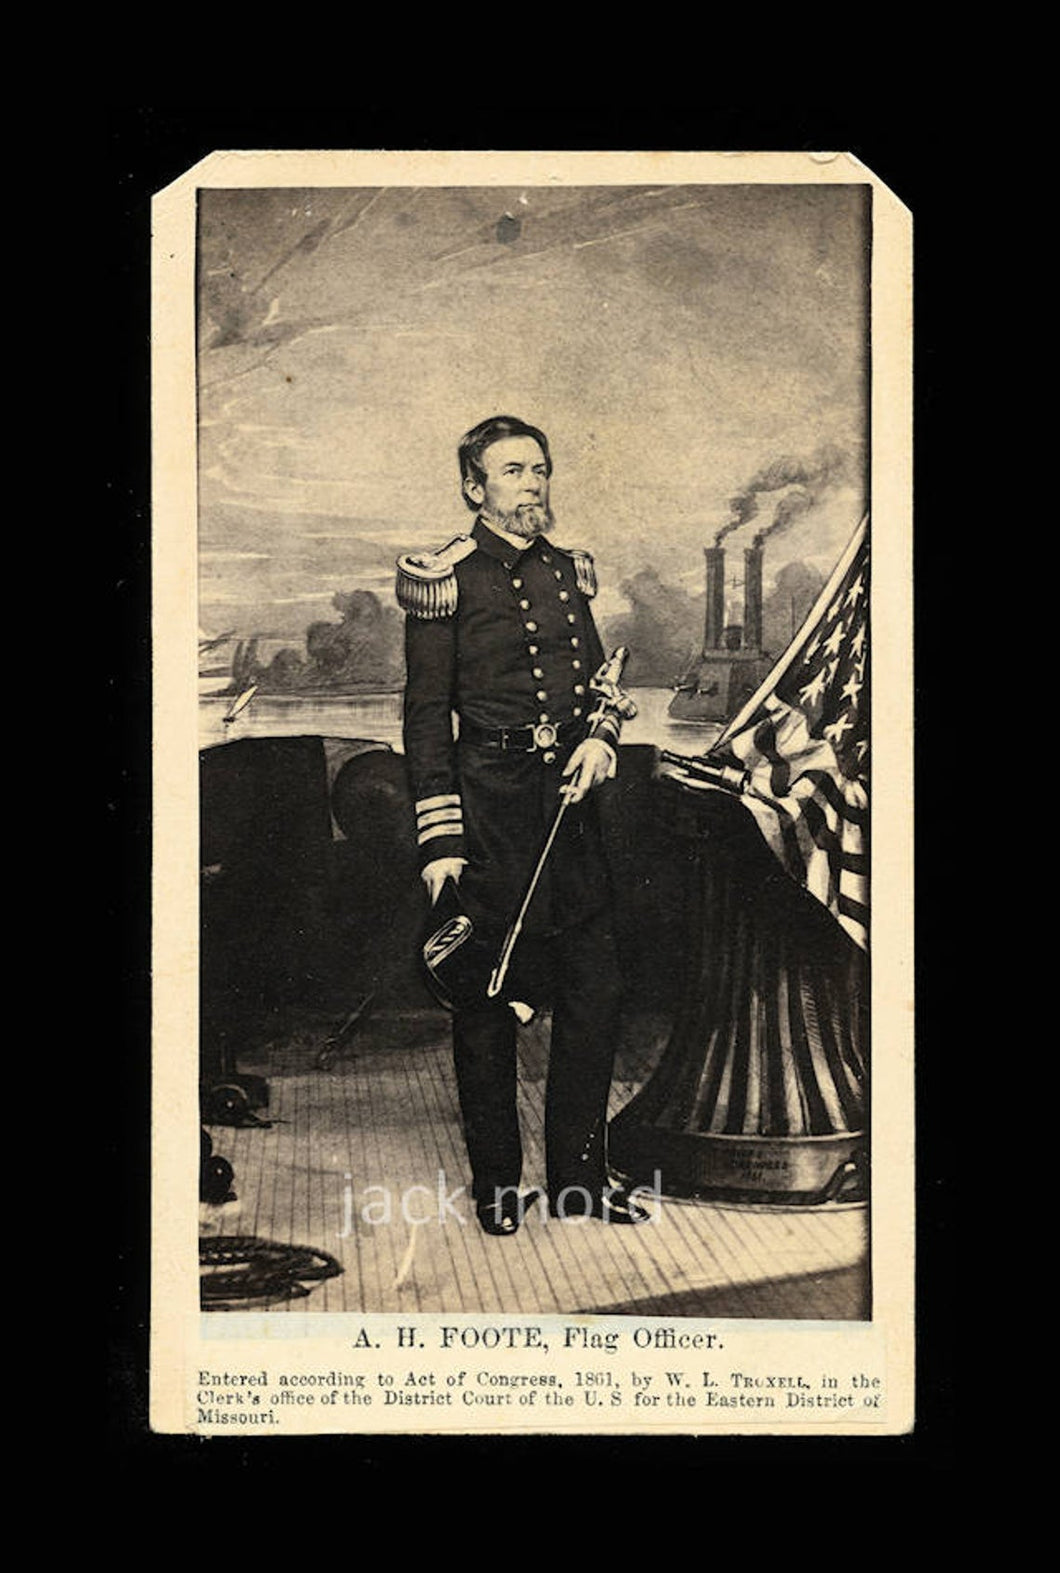 1861 CDV Photo Civil War Naval Rear Admiral Andrew Hull Foote on Ironclad Gunboat